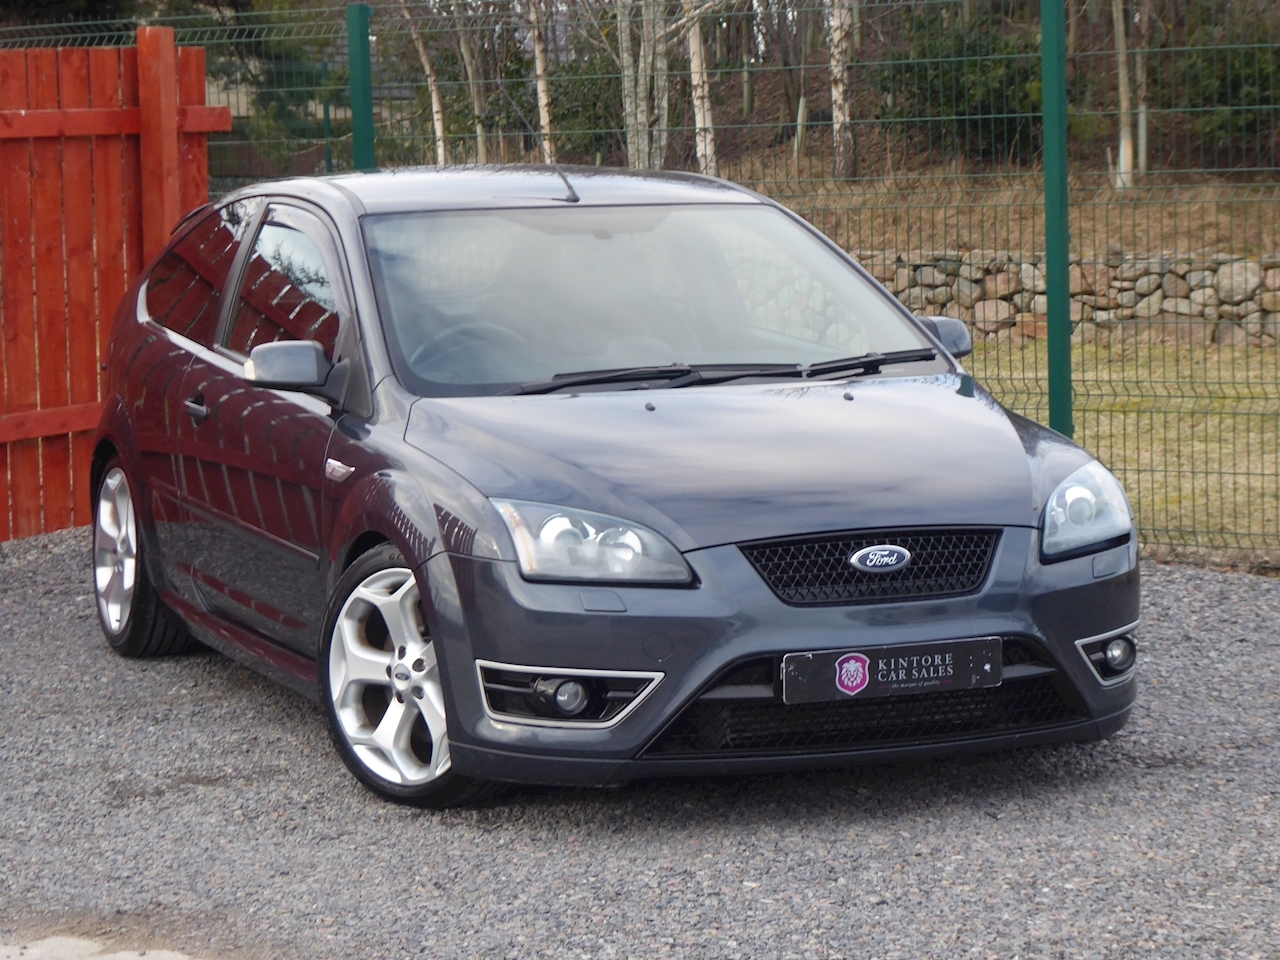 Used 2006 Ford Focus St 3 For Sale In Aberdeenshire U1800 Kintore